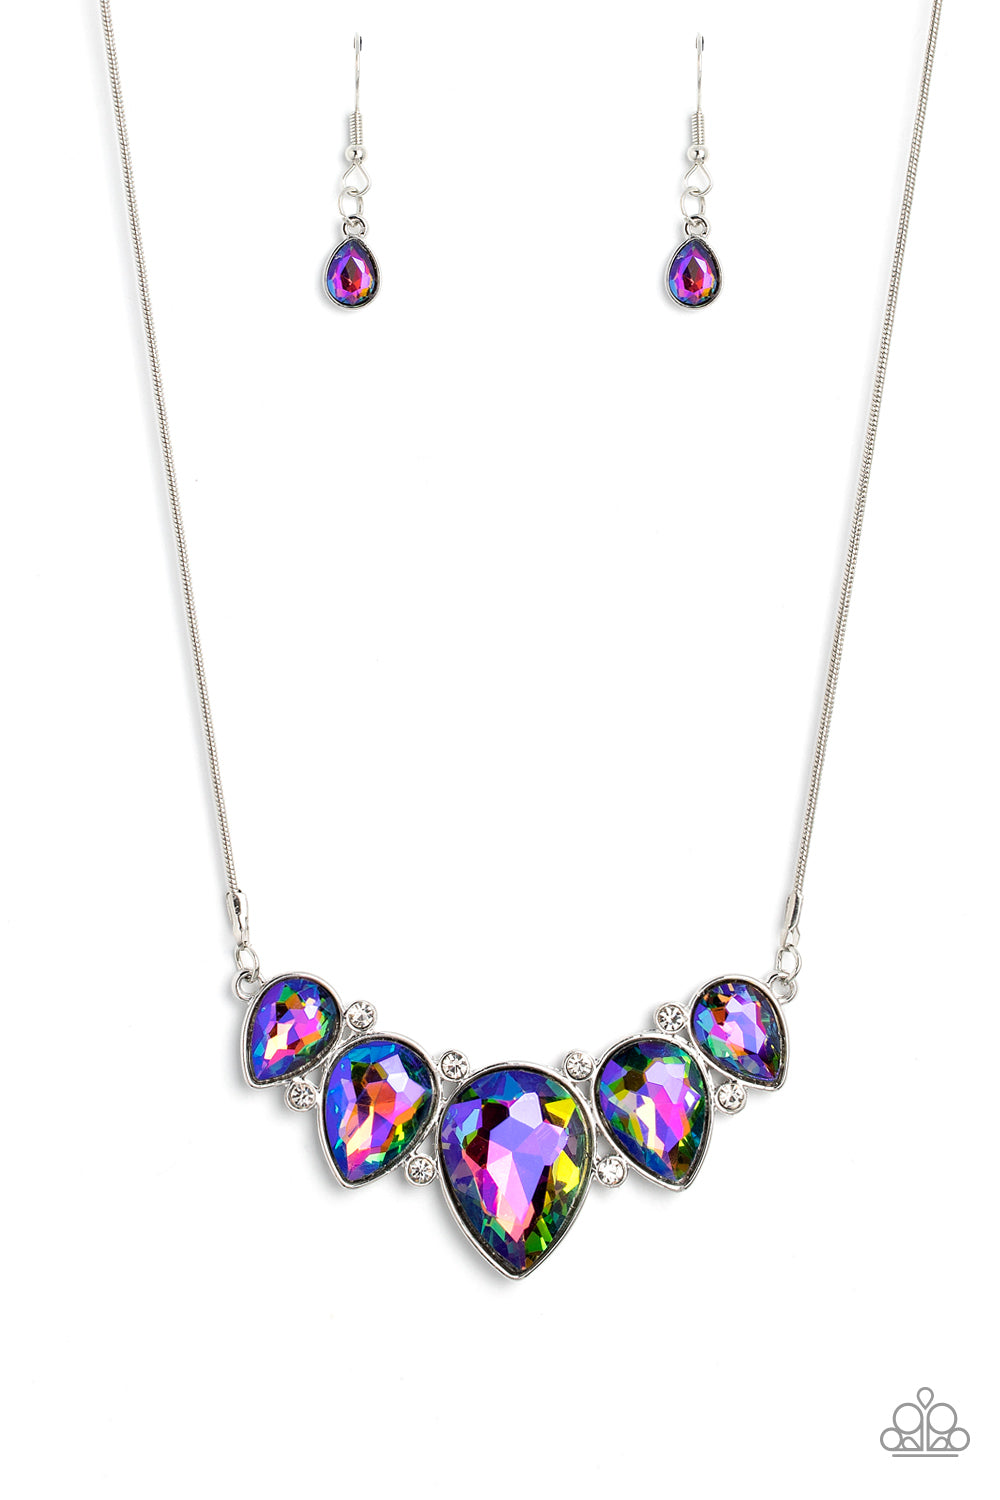 Regally Refined - Multi Necklace Set November 2022 Life of the Party Exclusive - Princess Glam Shop